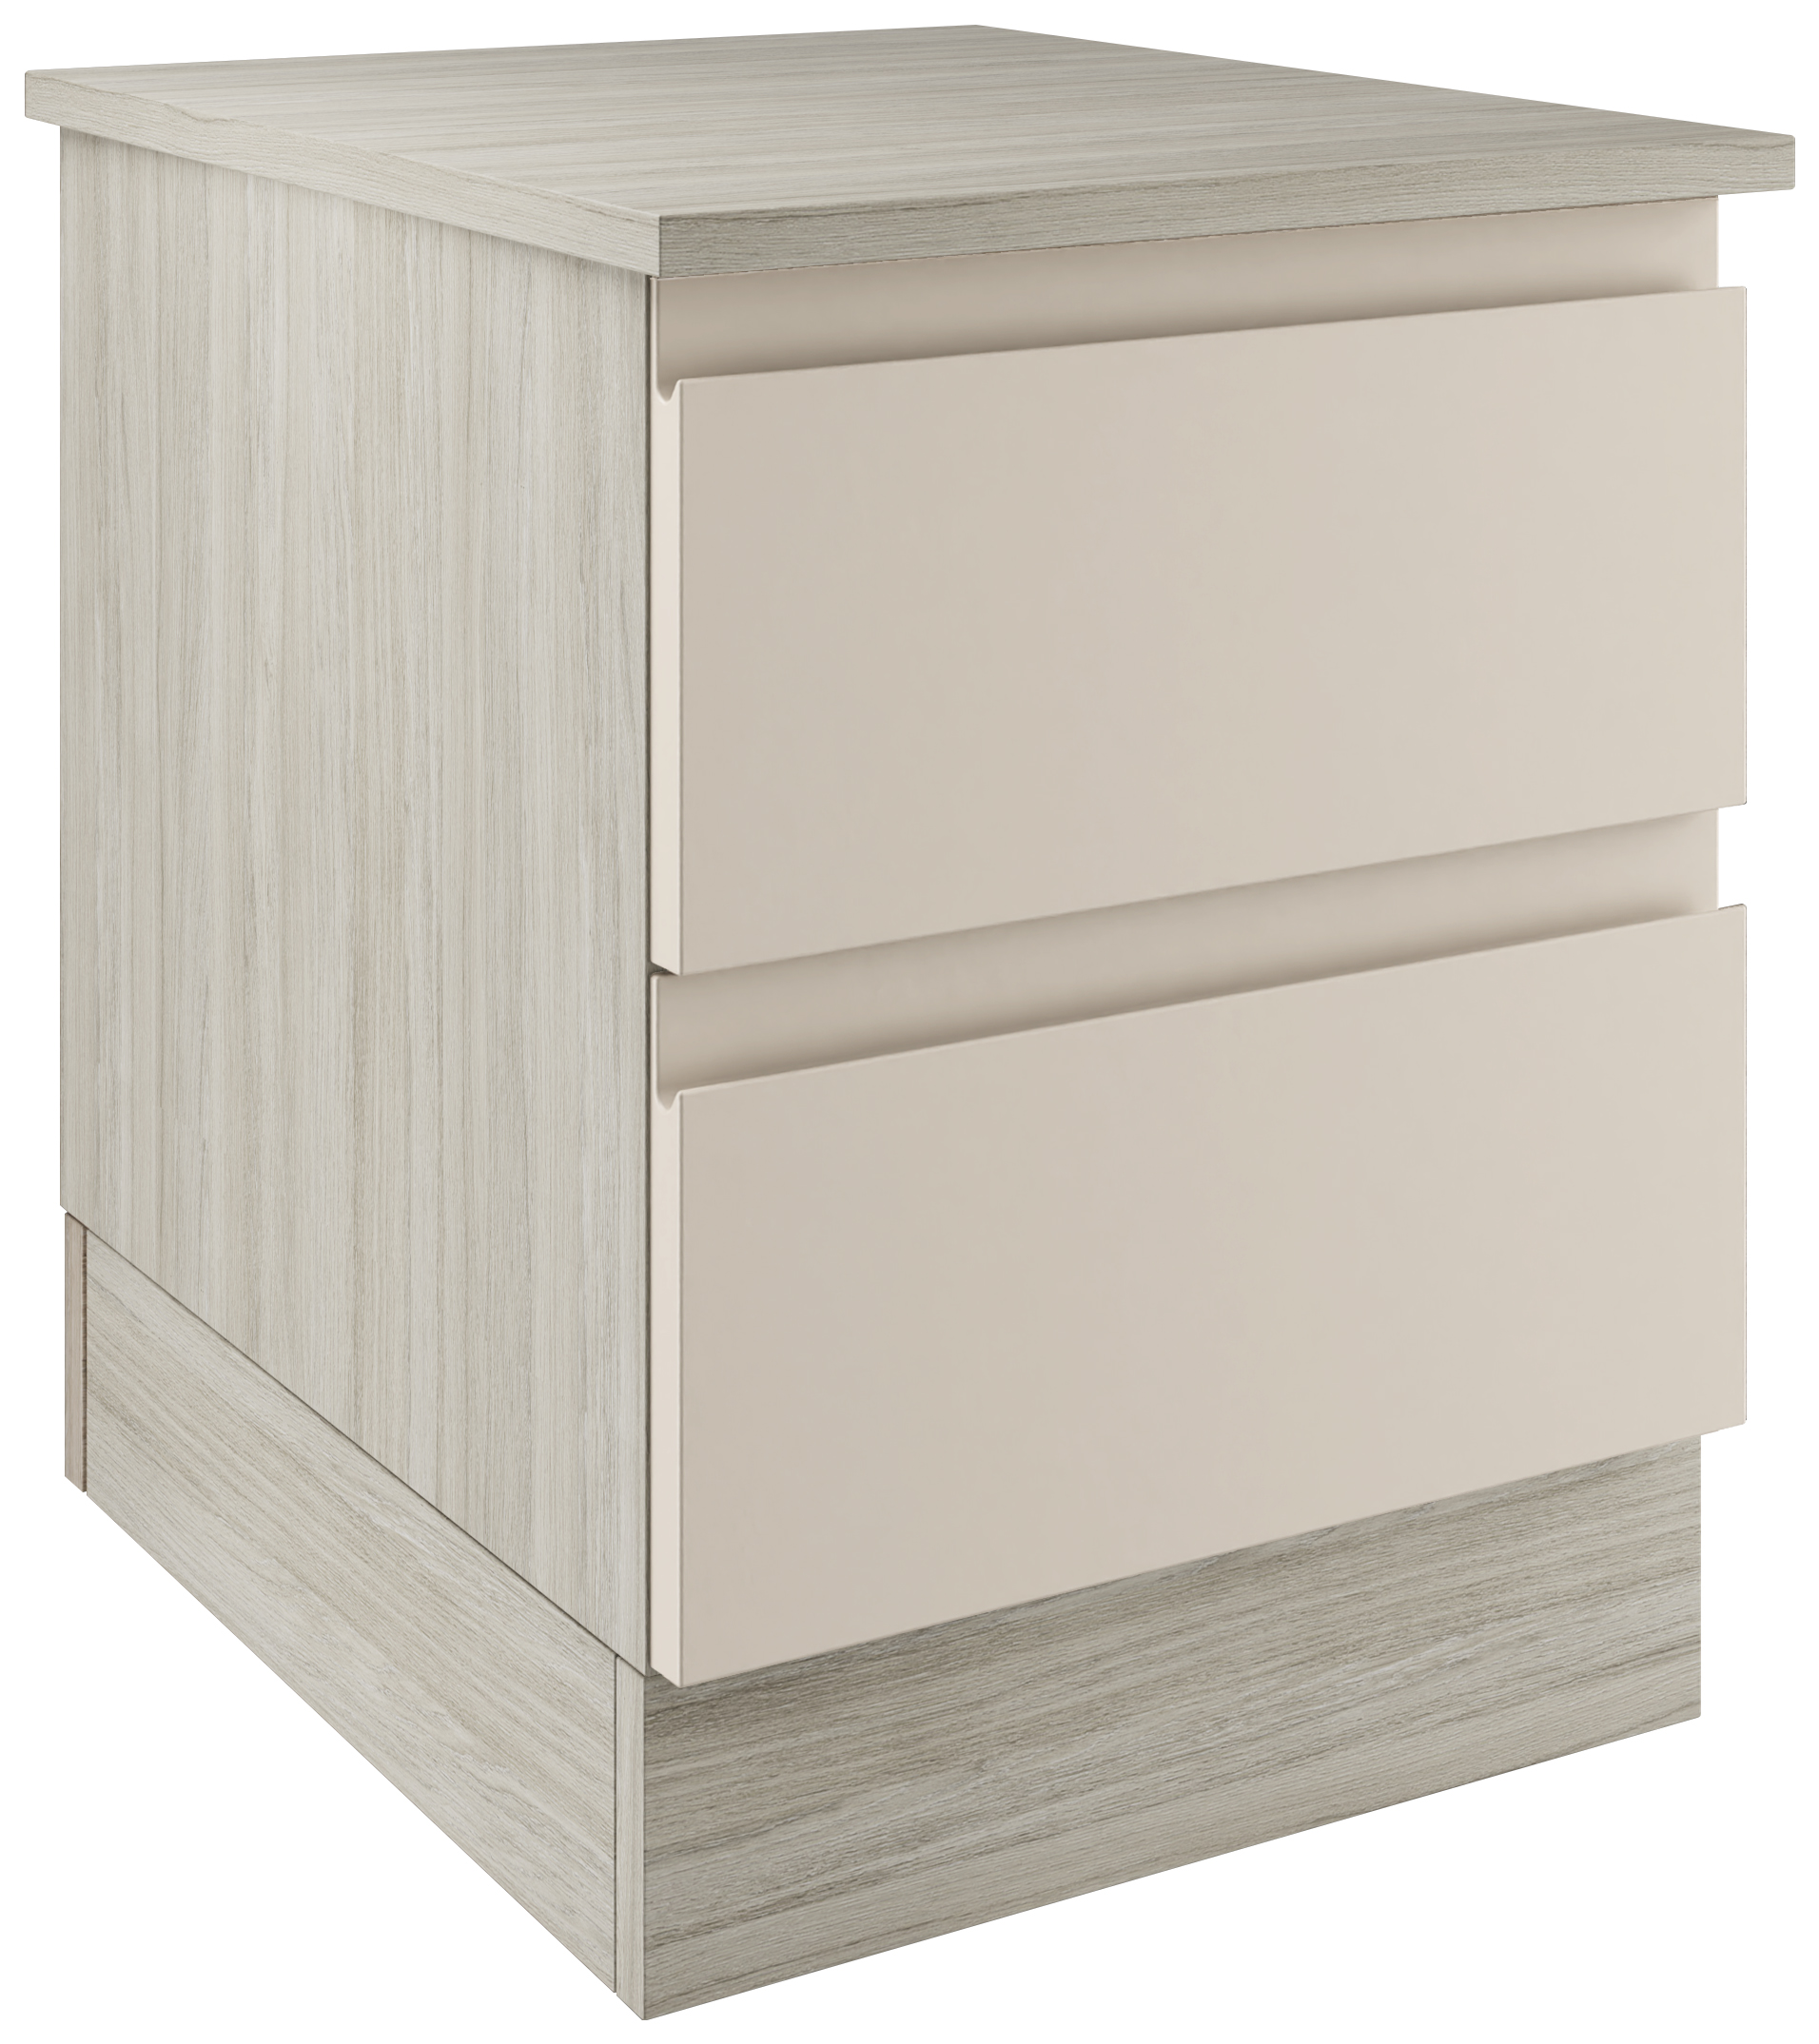 Boston Matt Cashmere Bedside Chest with 2 Drawers - 420 x 527 x 520mm